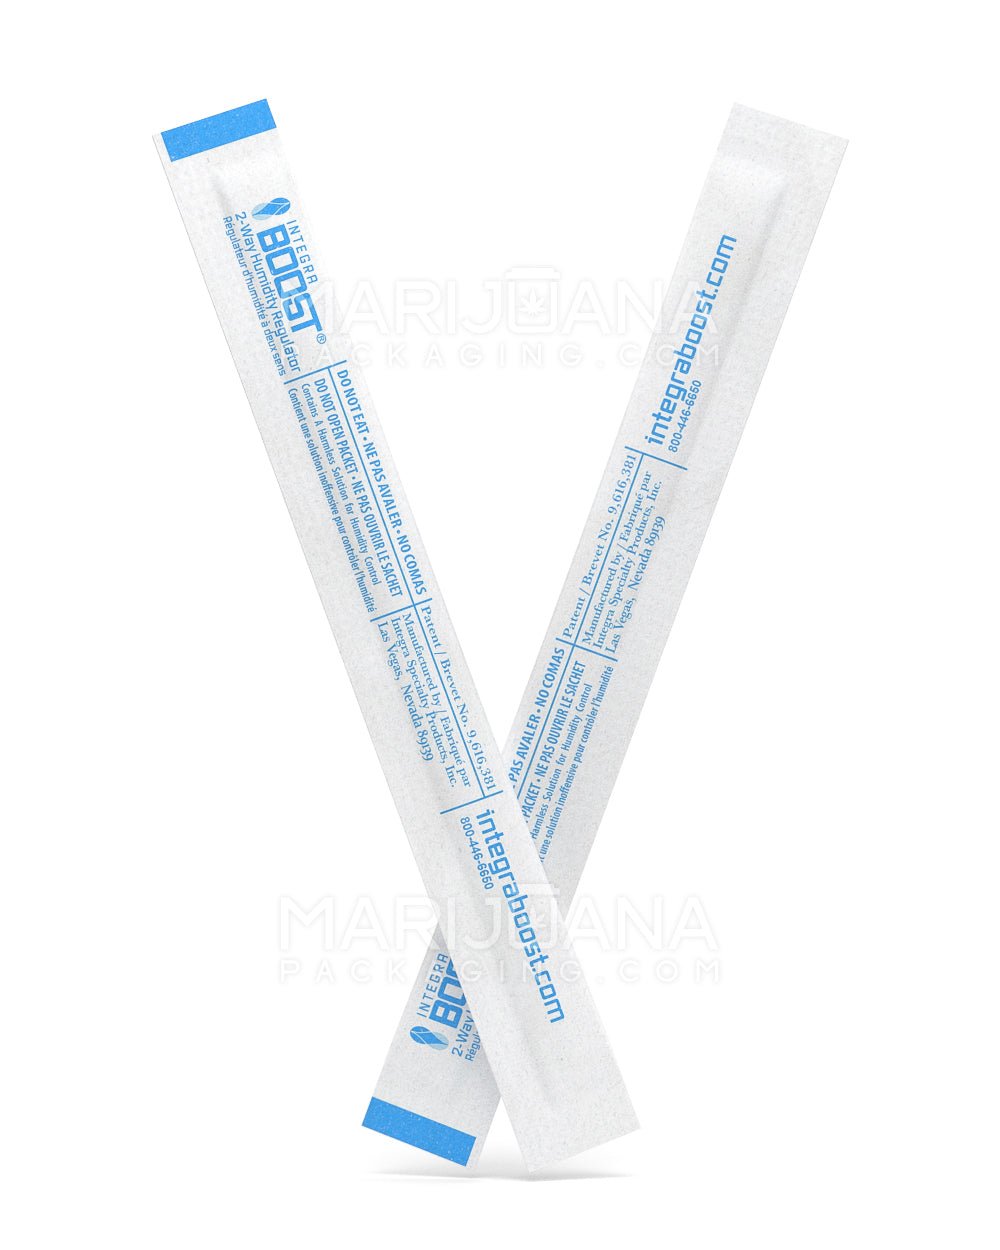 INTEGRA | Boost Pre-Roll Humidity Packs | 110mm - 62% - 100 Count - 3